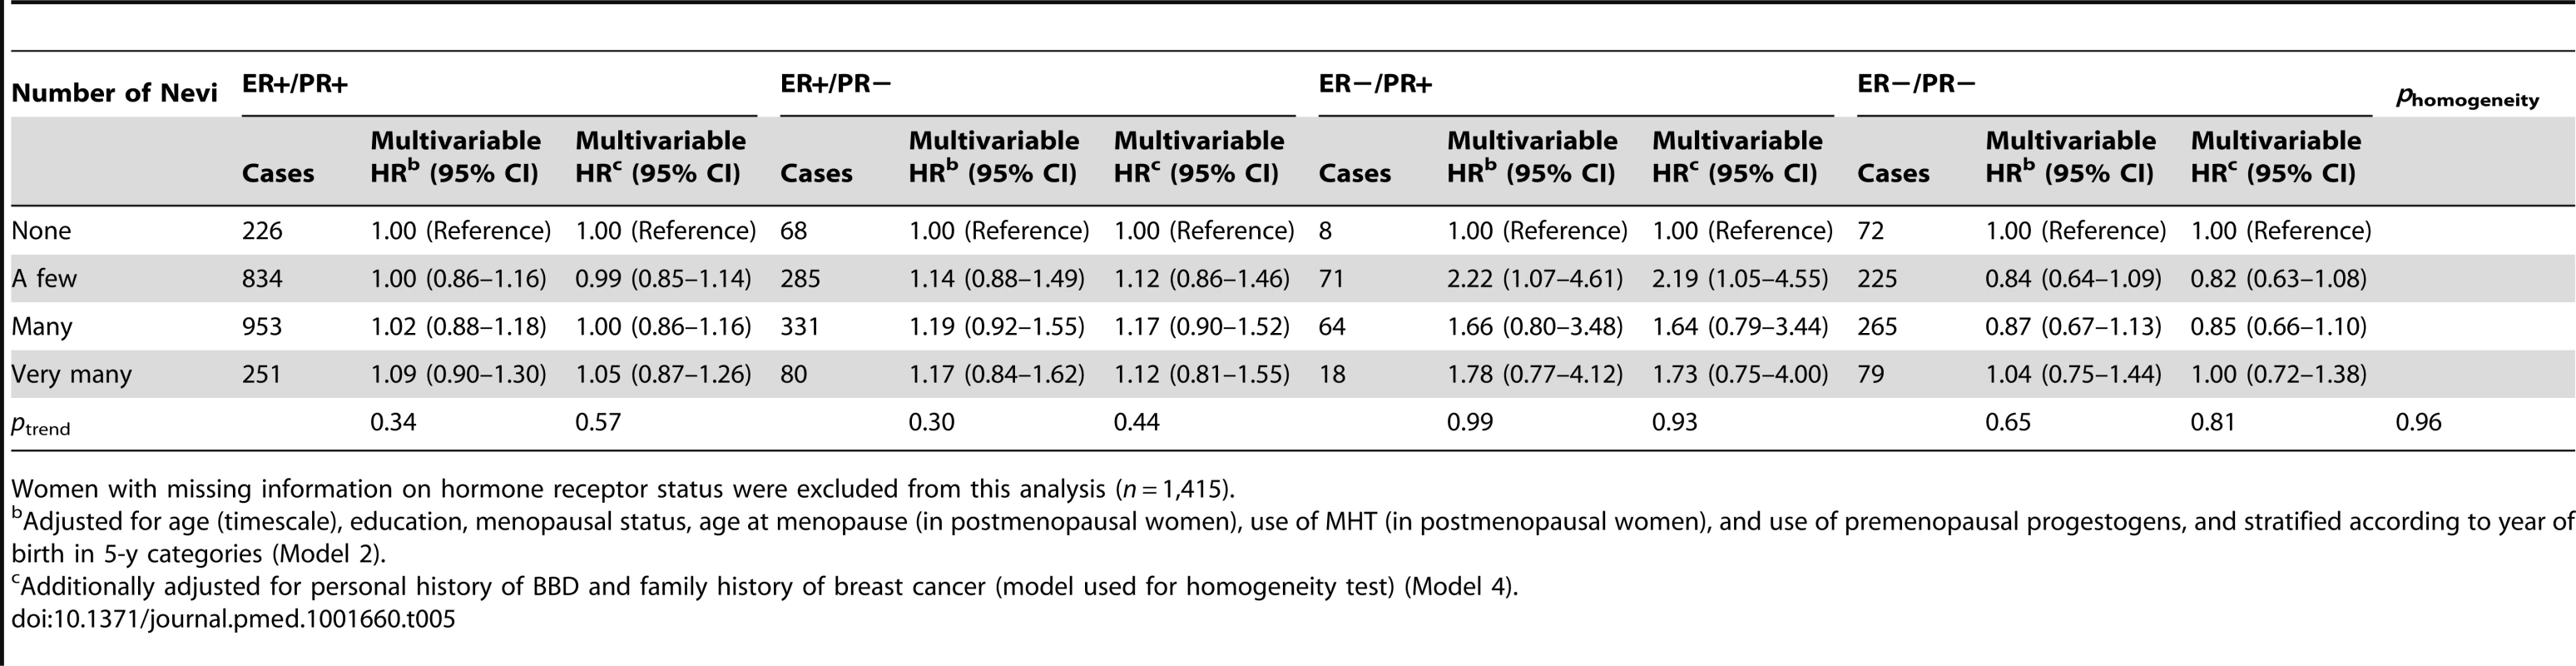 Hazard ratios and 95% confidence intervals for risk of breast cancer in relation to number of nevi, stratified by hormonal receptor status, E3N cohort (<i>n = </i>88,387).